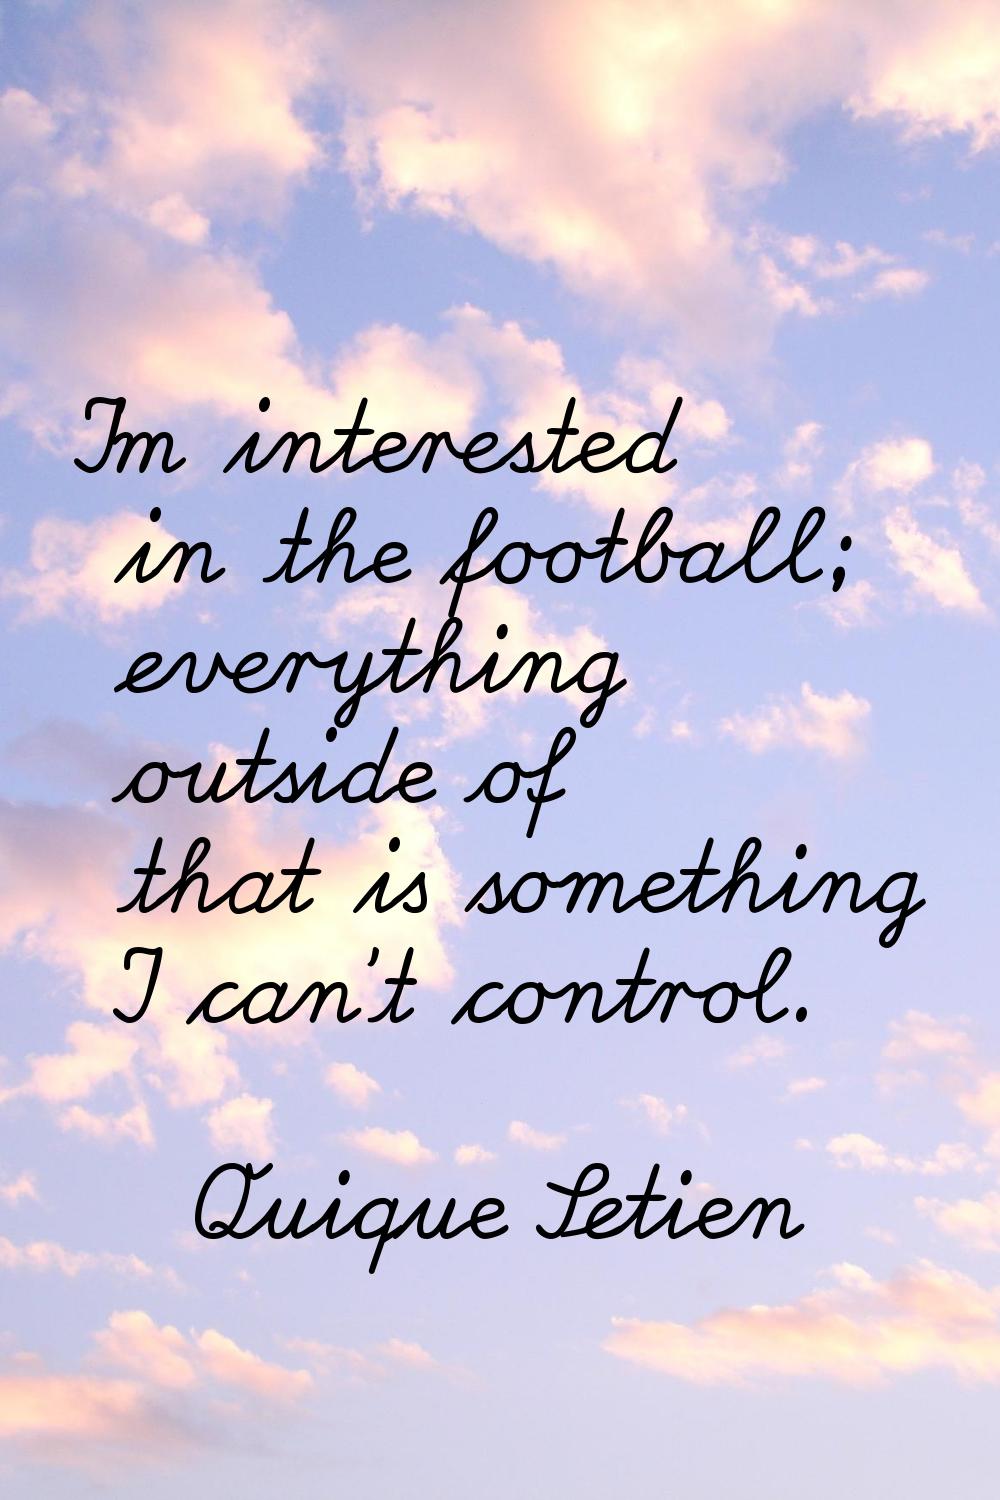 I'm interested in the football; everything outside of that is something I can't control.